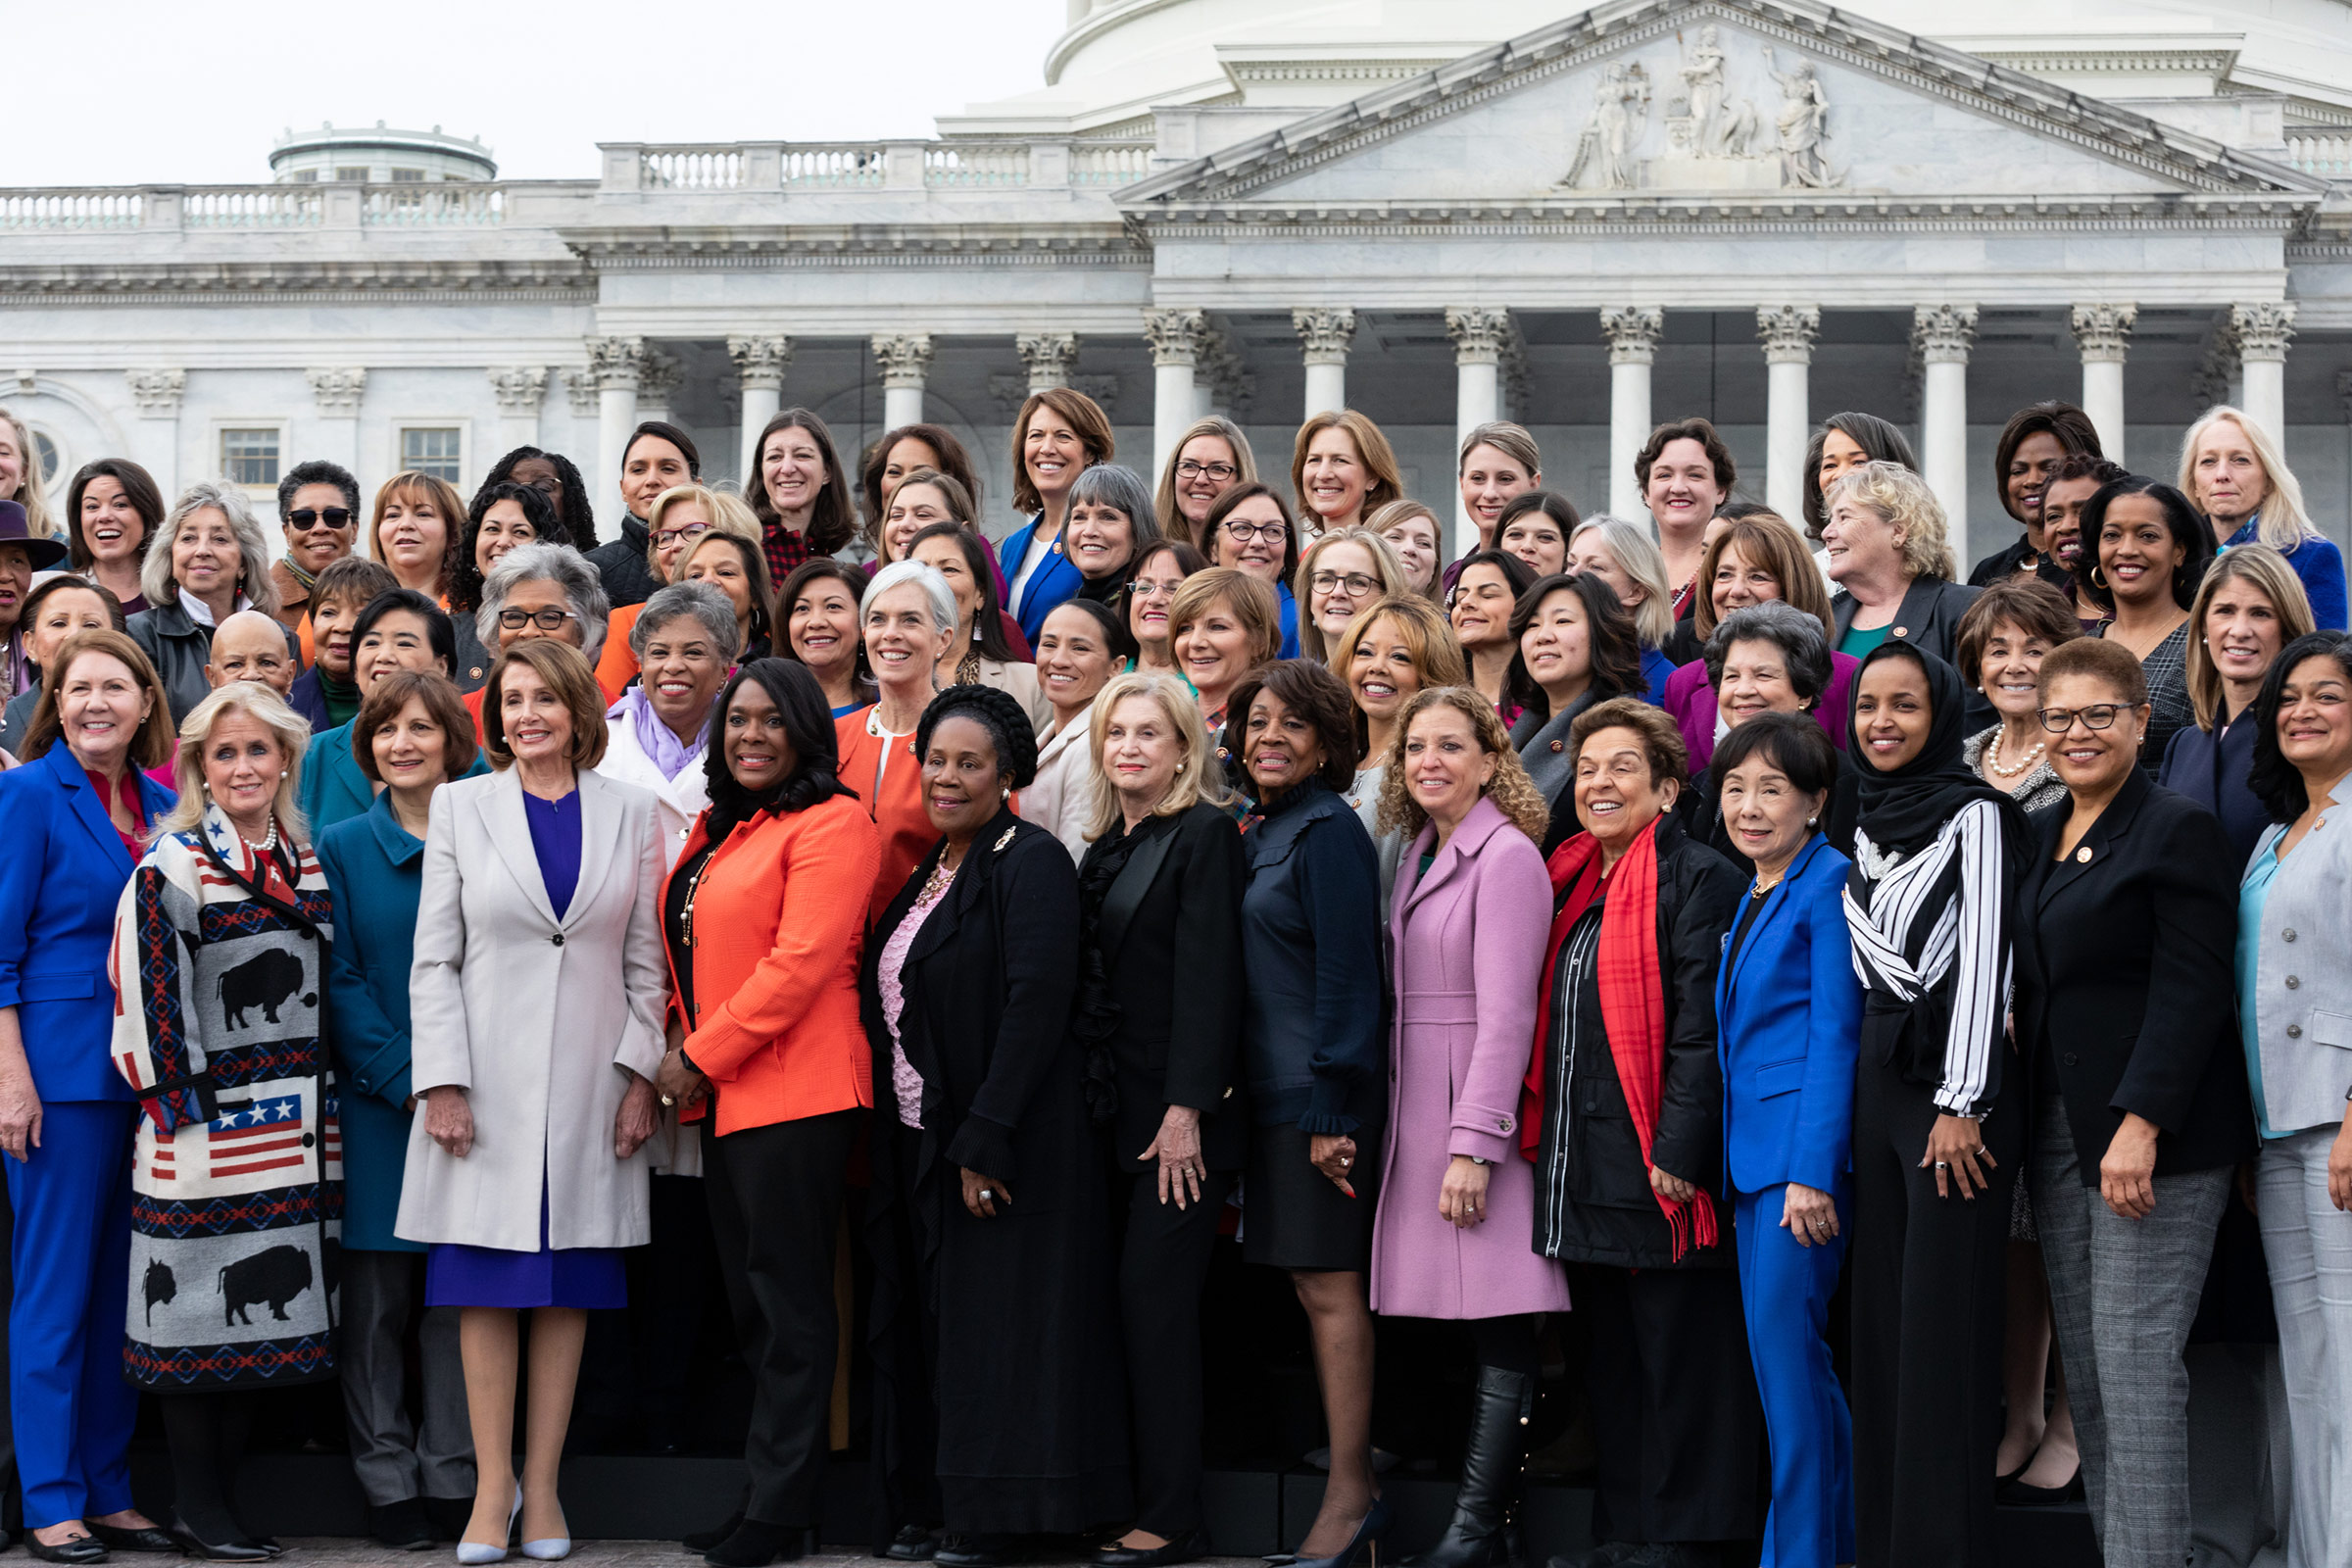 Speaker Nancy Pelosi (D-CA), (4th from left, front row), poses for a group photo with her fellow House Democratic women in front of the U.S. Capitol in Washington, DC, on  January 4. The 116th Congress currently has the largest number of female members. (Cheriss May—NurPhoto/Getty Images)